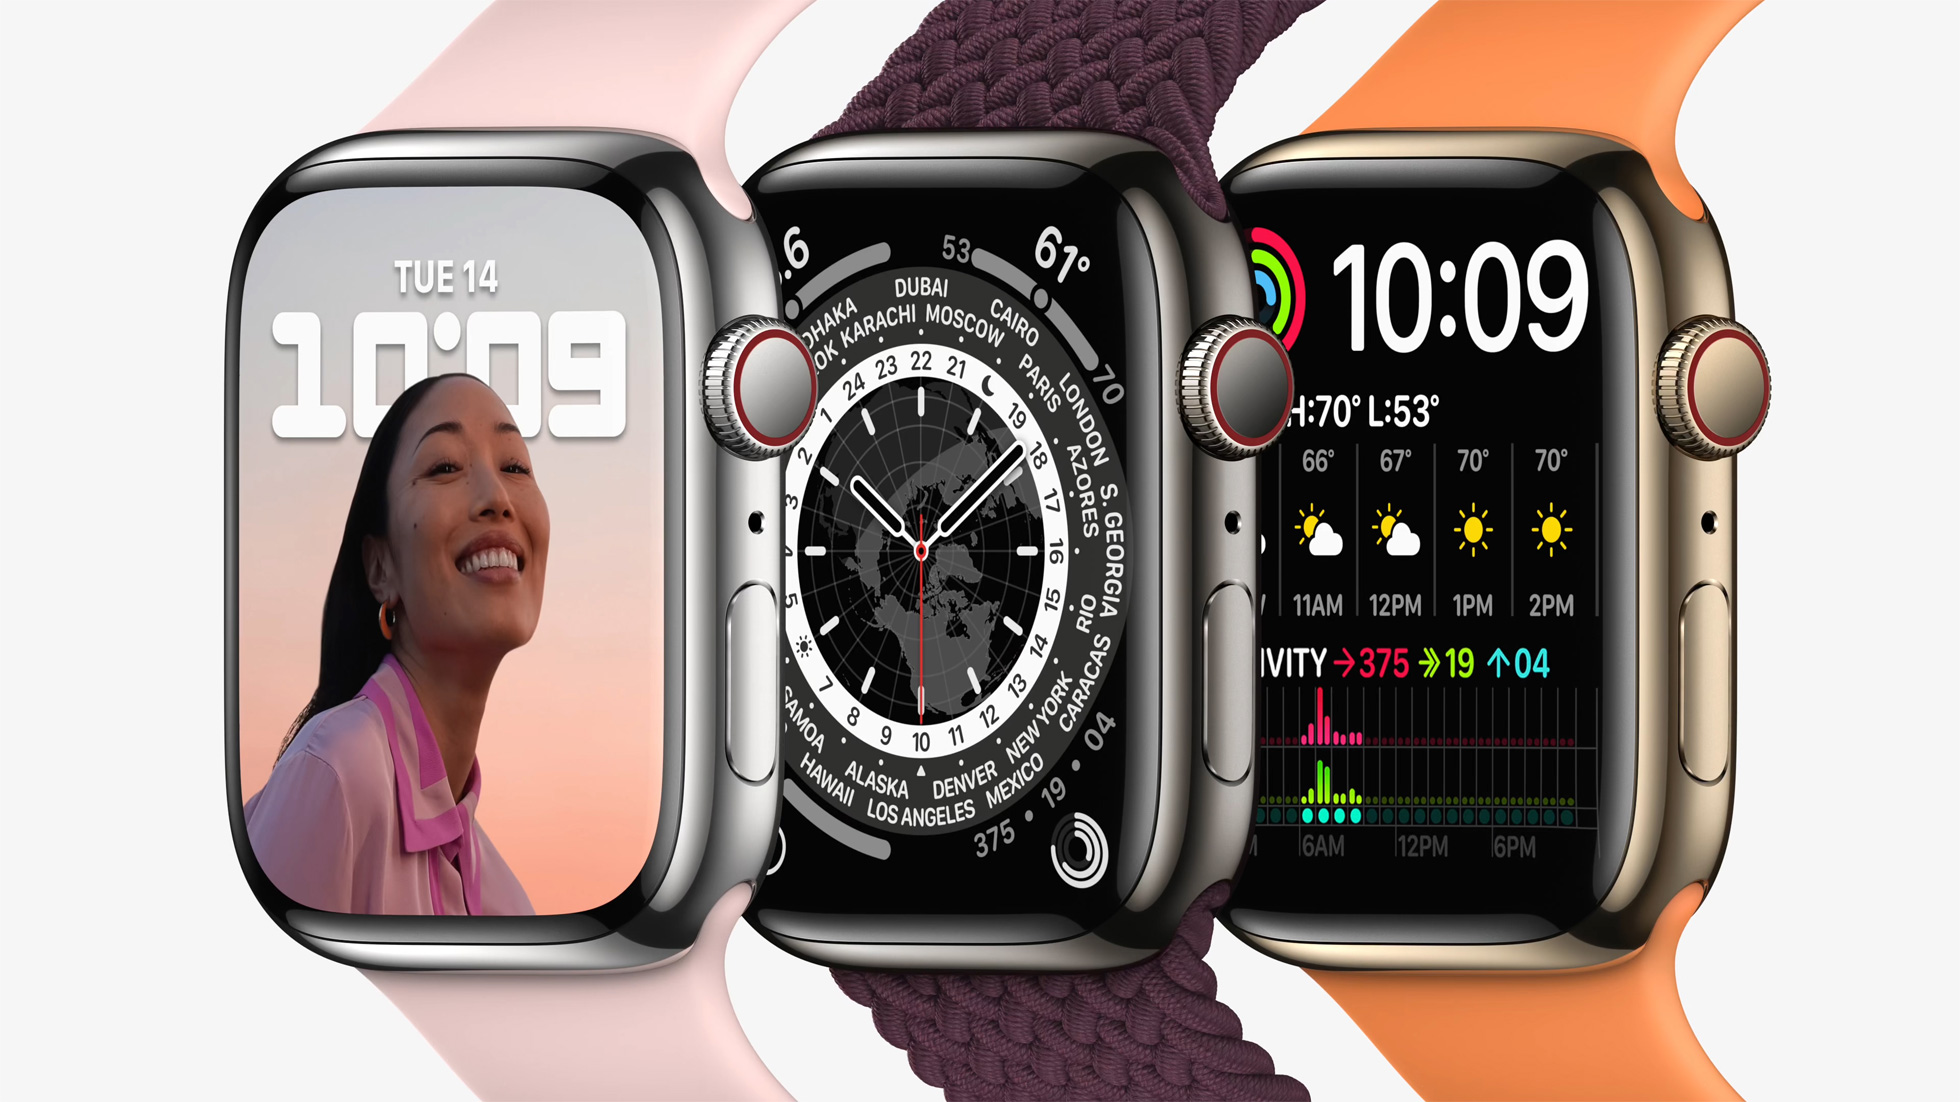 Apple Watch Series 7 Models Widely Unavailable Ahead of Next Week’s Event